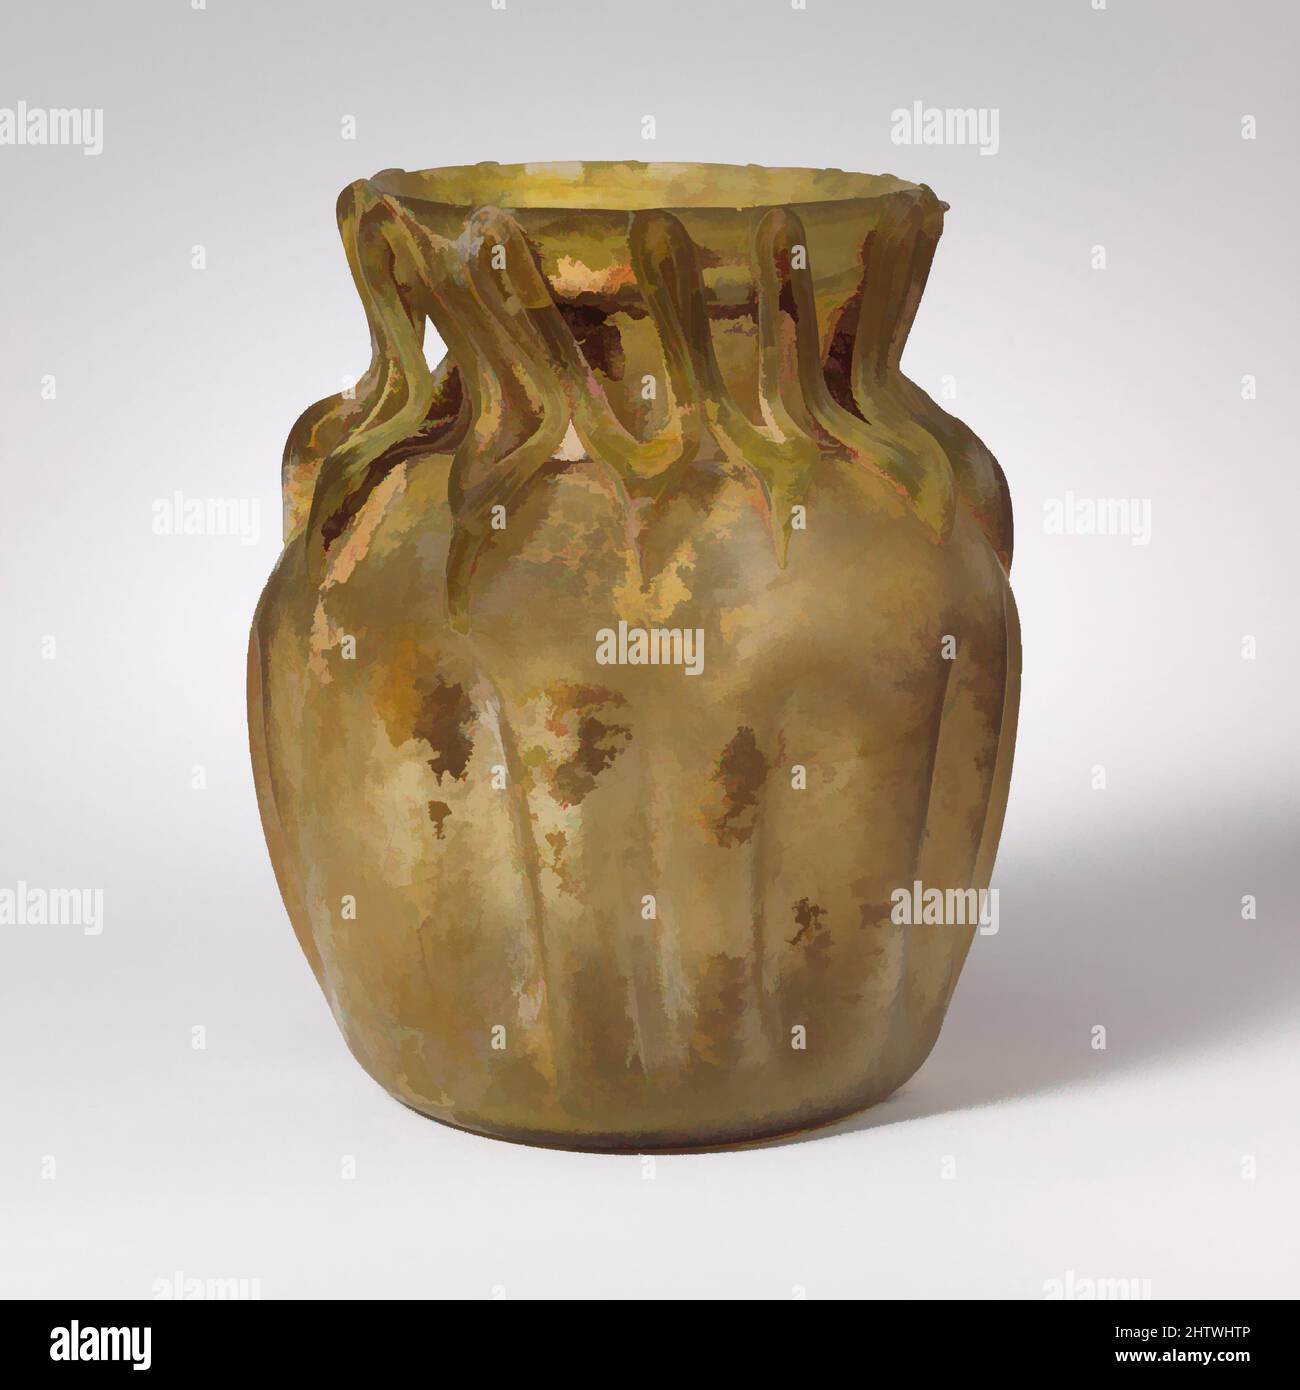 https://c8.alamy.com/comp/2HTWHTP/art-inspired-by-glass-jar-late-imperial-4th-century-ad-roman-syrian-glass-blown-and-trailed-h-4-1116-in-119-cm-glass-translucent-pale-yellow-green-trail-in-same-color-rounded-everted-rim-with-hollow-folded-flange-below-wide-cylindrical-neck-tapering-downwards-classic-works-modernized-by-artotop-with-a-splash-of-modernity-shapes-color-and-value-eye-catching-visual-impact-on-art-emotions-through-freedom-of-artworks-in-a-contemporary-way-a-timeless-message-pursuing-a-wildly-creative-new-direction-artists-turning-to-the-digital-medium-and-creating-the-artotop-nft-2HTWHTP.jpg